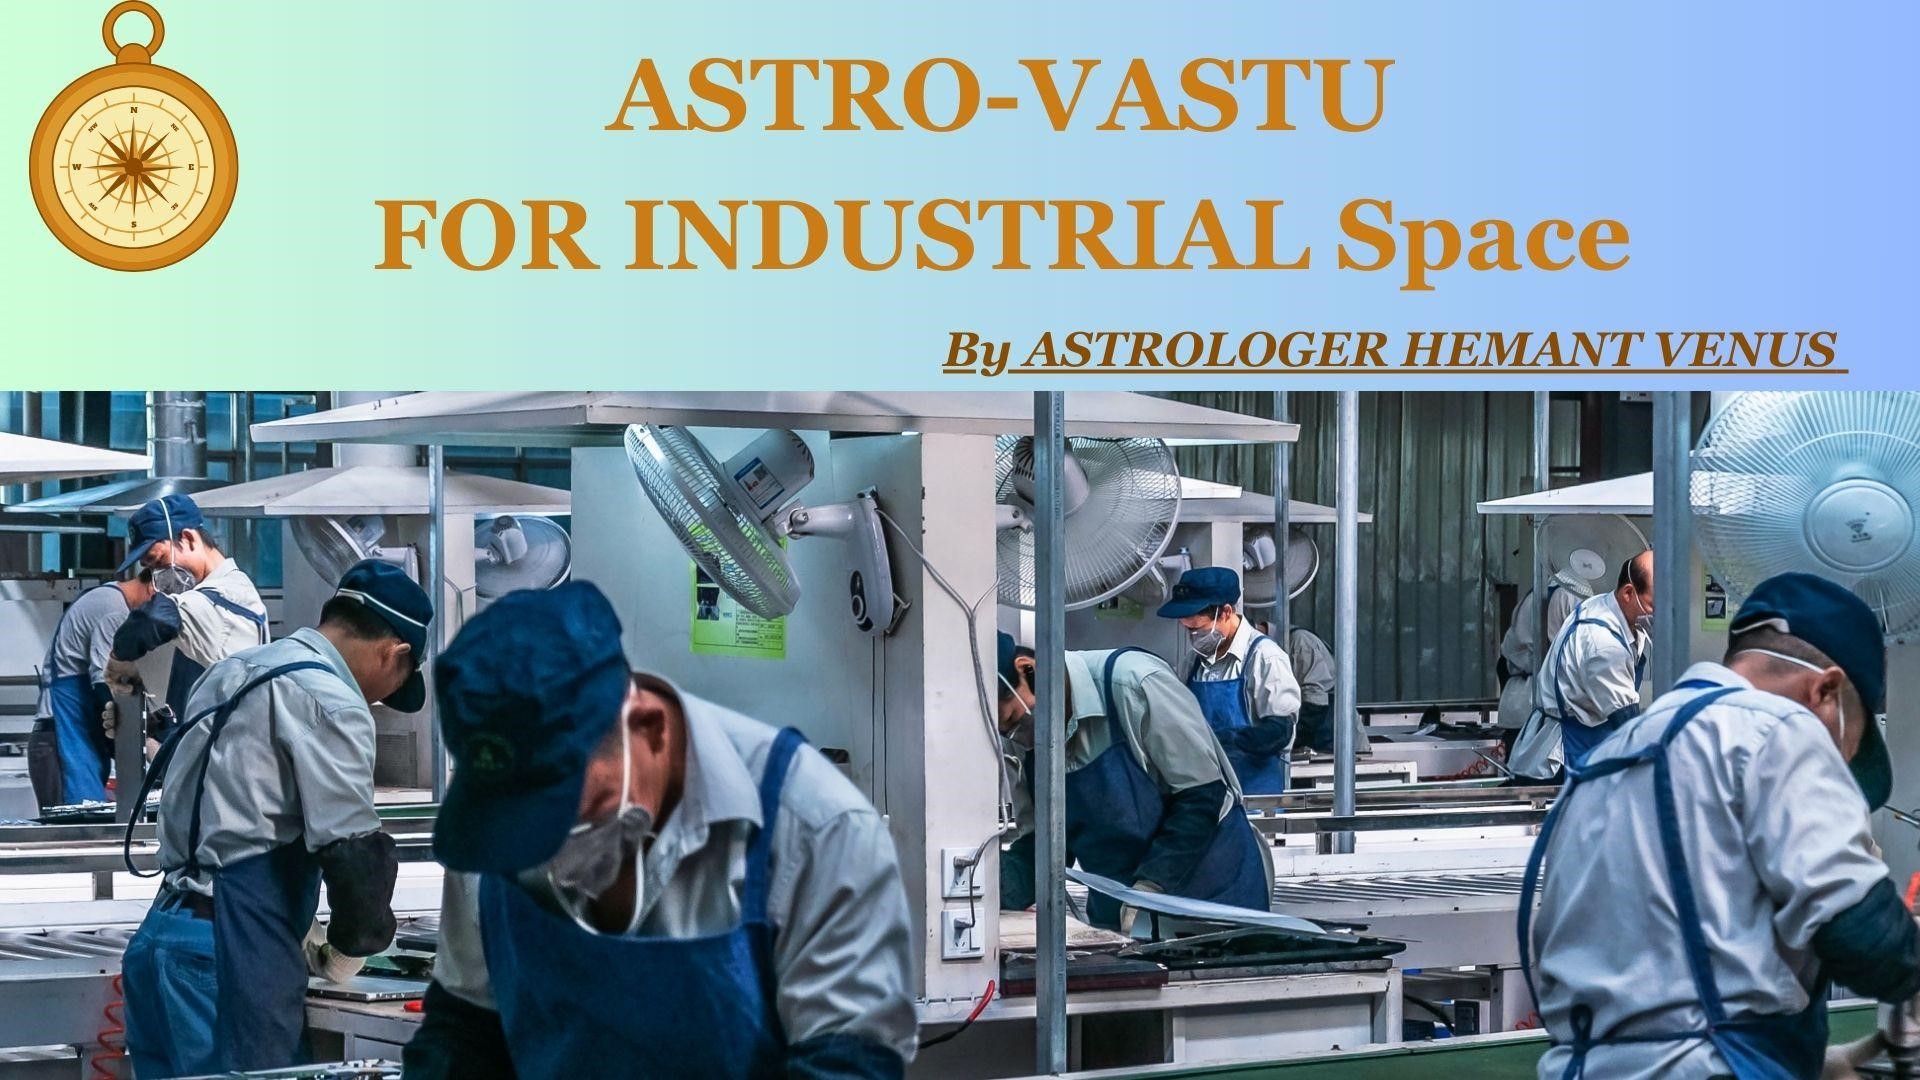 Astro-Vastu for Industrial Space: A Complete One-Stop Guide